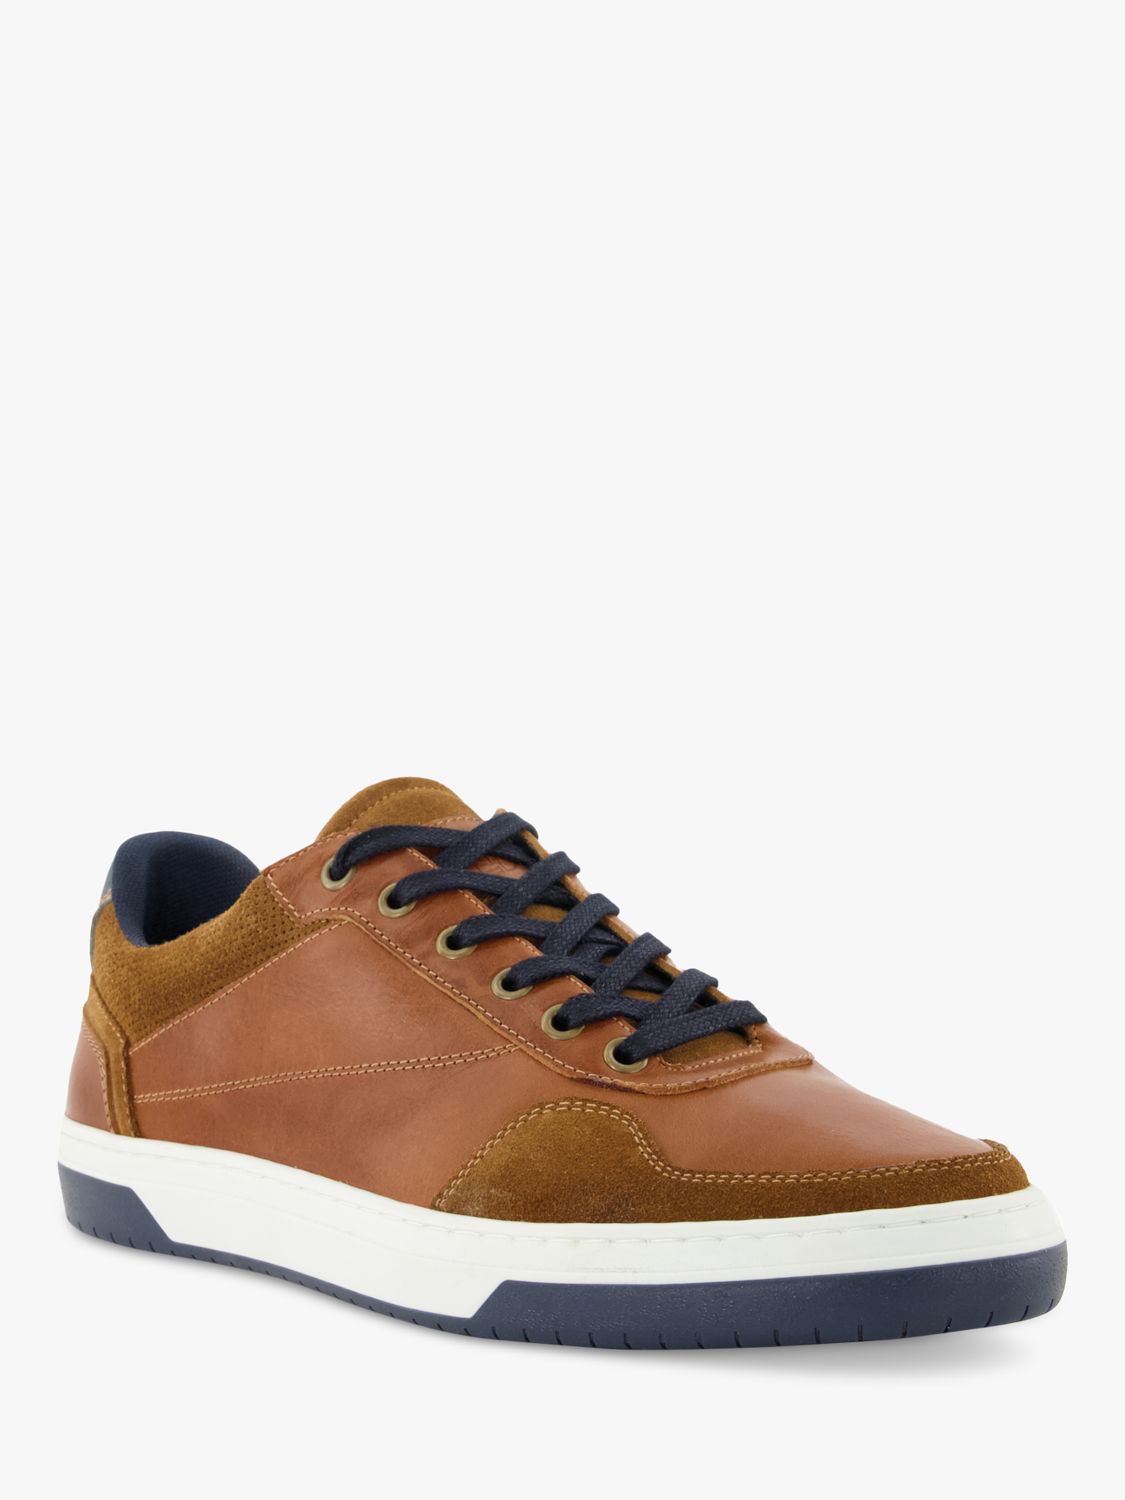 Dune Thorin Leather Lace Up Trainers, Tan, EU40